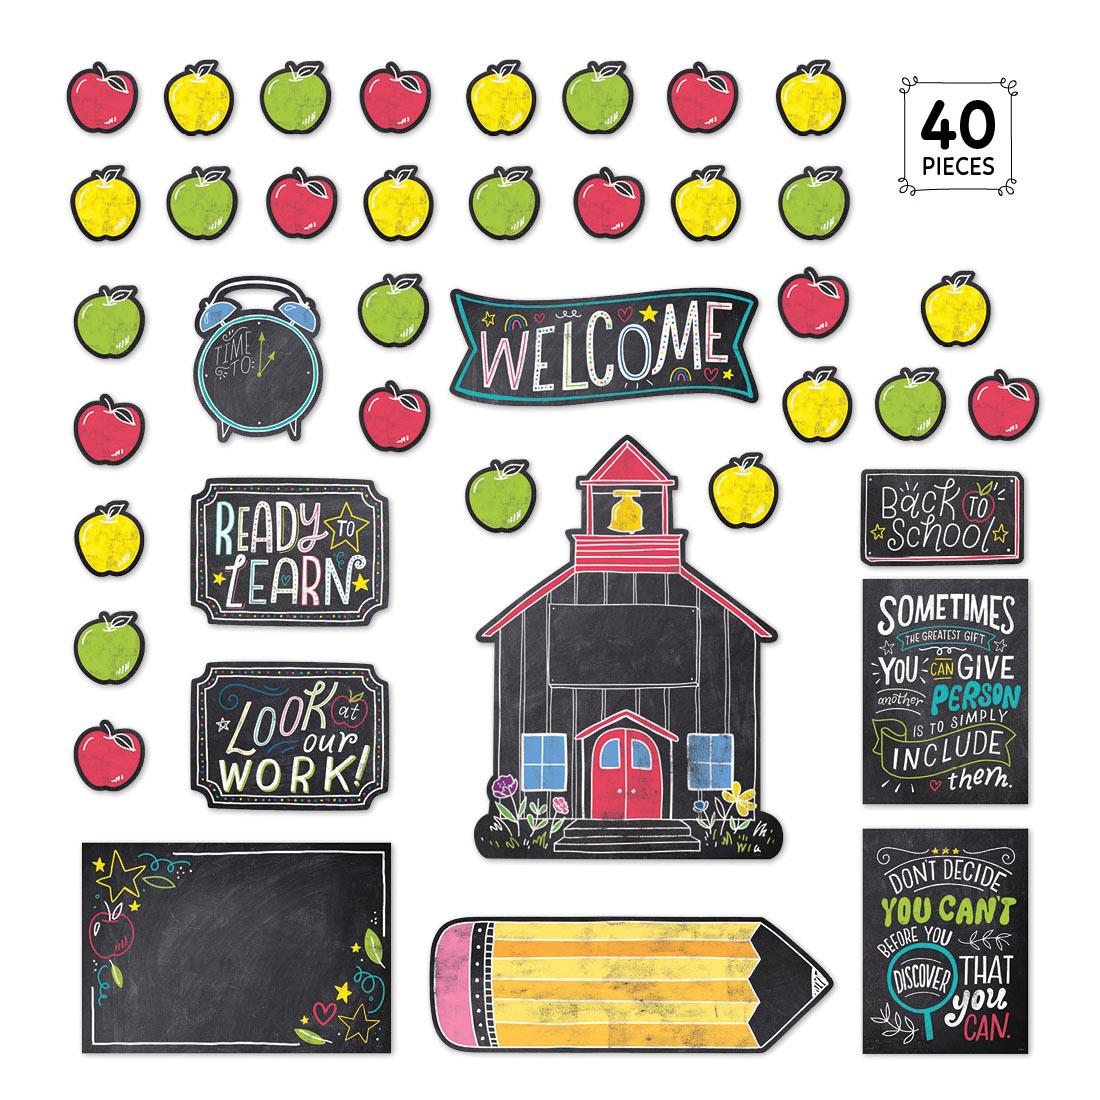 School Time Fun Bulletin Board Set from the Chalk It Up! Collection By Creative Teaching Press with the text 40 Pieces